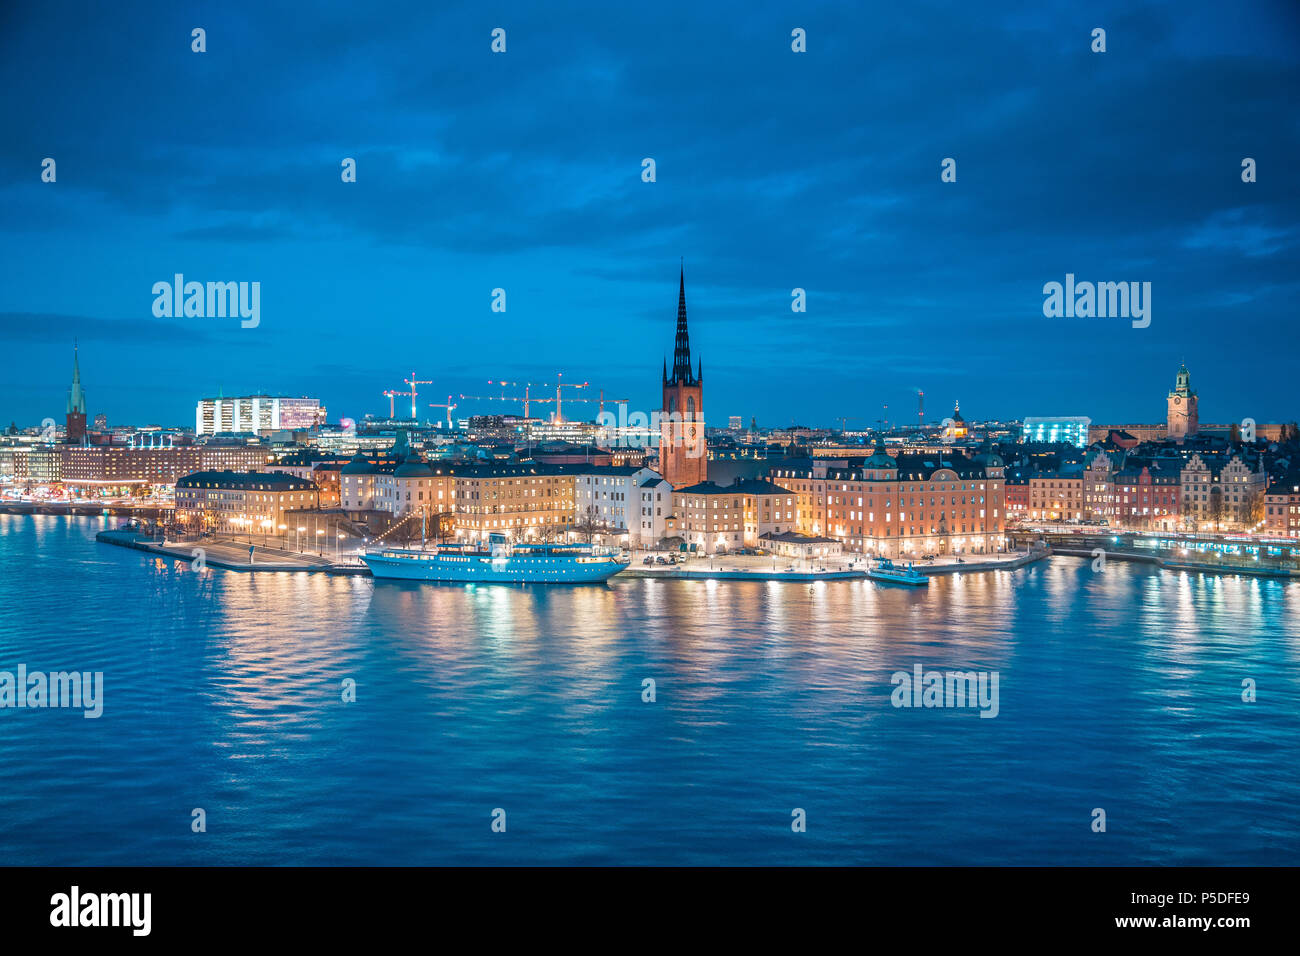 Panoramic view of famous Stockholm city center with historic Riddarholmen in Gamla Stan old town district during blue hour at dusk, Sweden Stock Photo